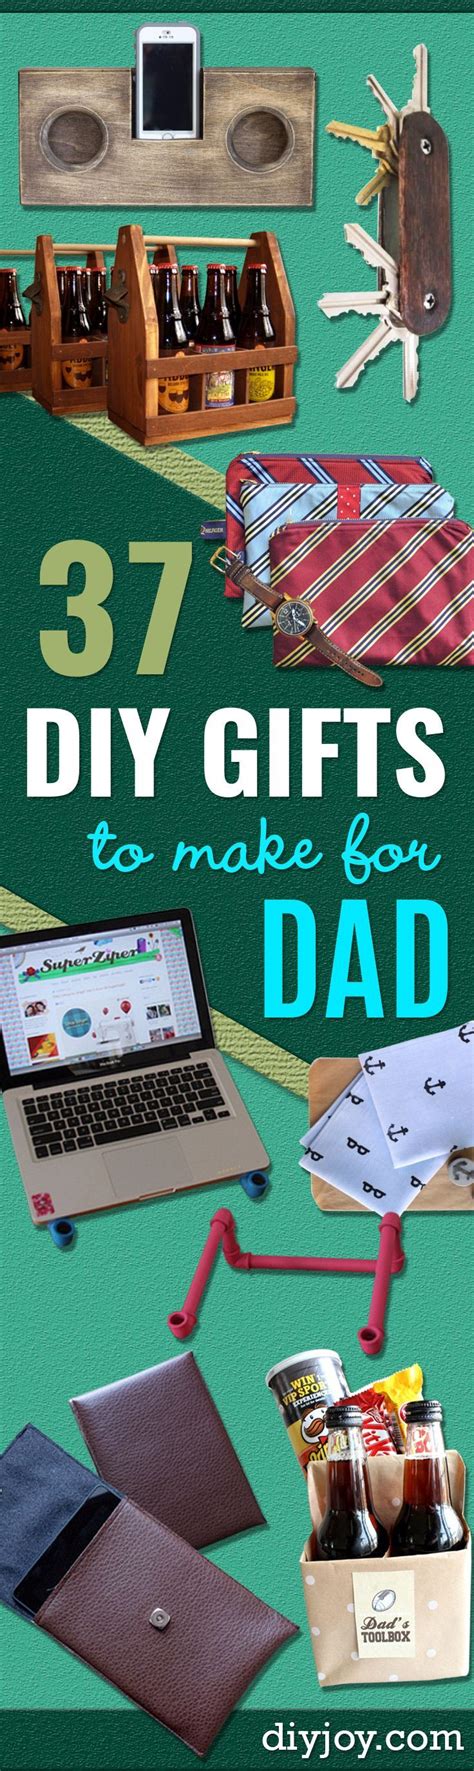 Homemade birthday card ideas for dad from daughter. 37 DIY Gifts to Make for Dad | Diy gifts to make, Diy ...